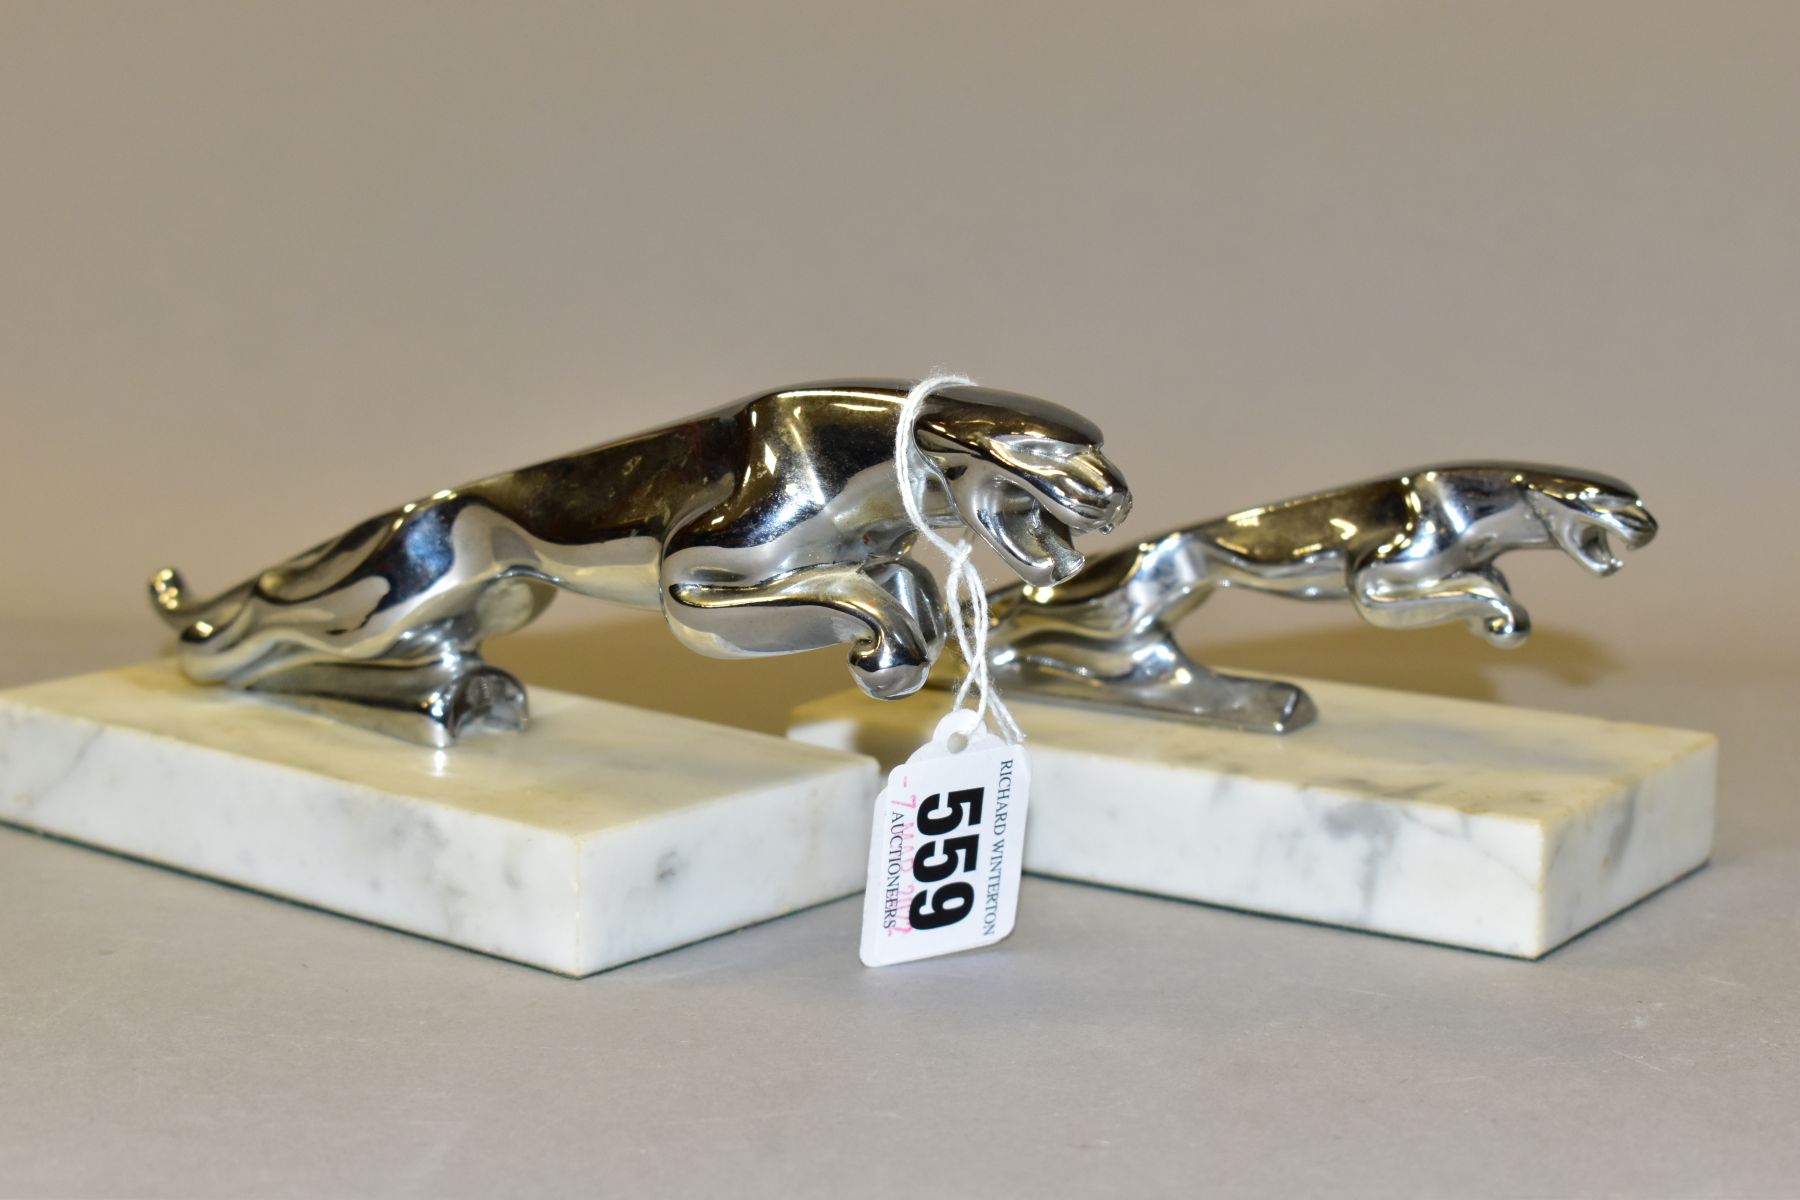 TWO CHROMED JAGUAR MASCOTS ON MARBLE PLINTHS, leaping jaguars in two different sizes, lengths 12.5cm - Image 3 of 5